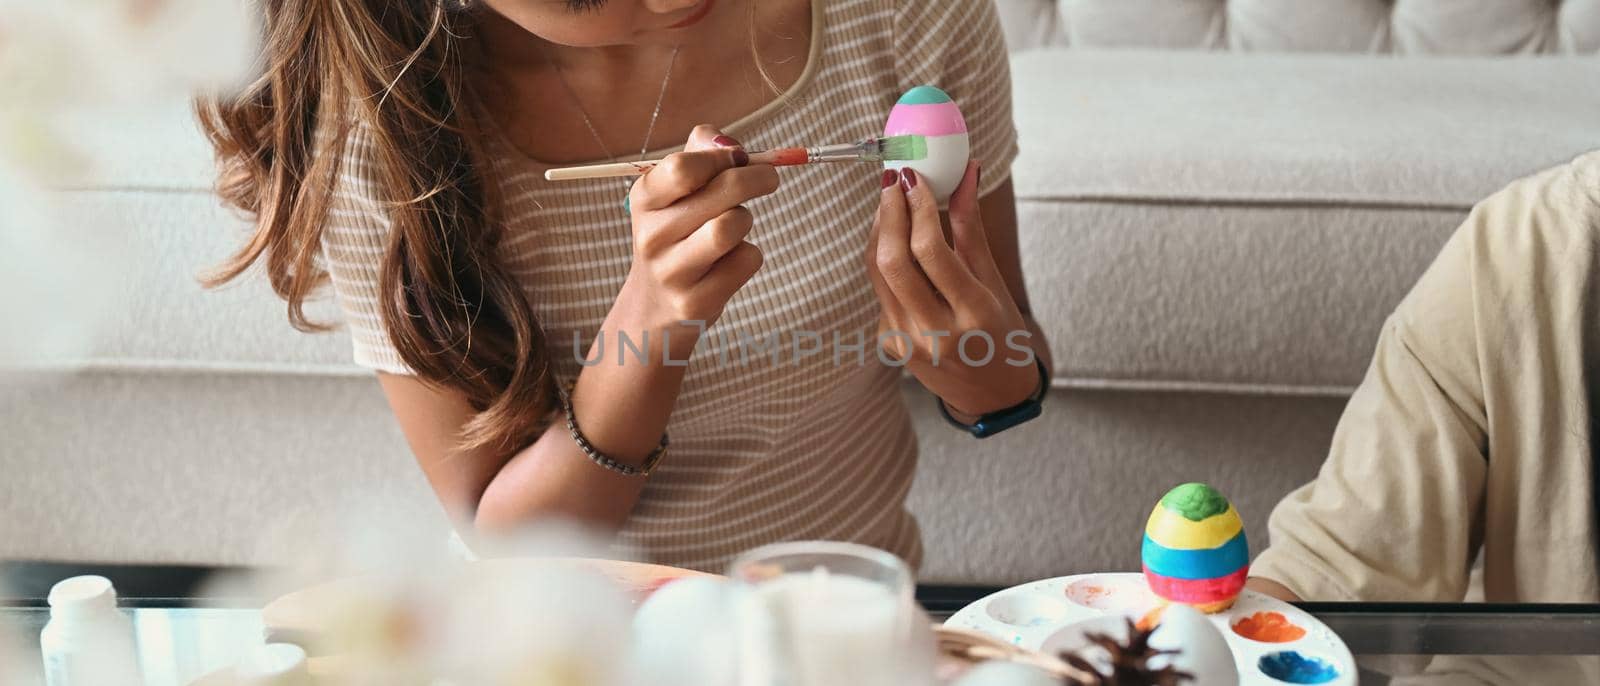 Young woman holding paintbrush and painting egg for Easter festivity.